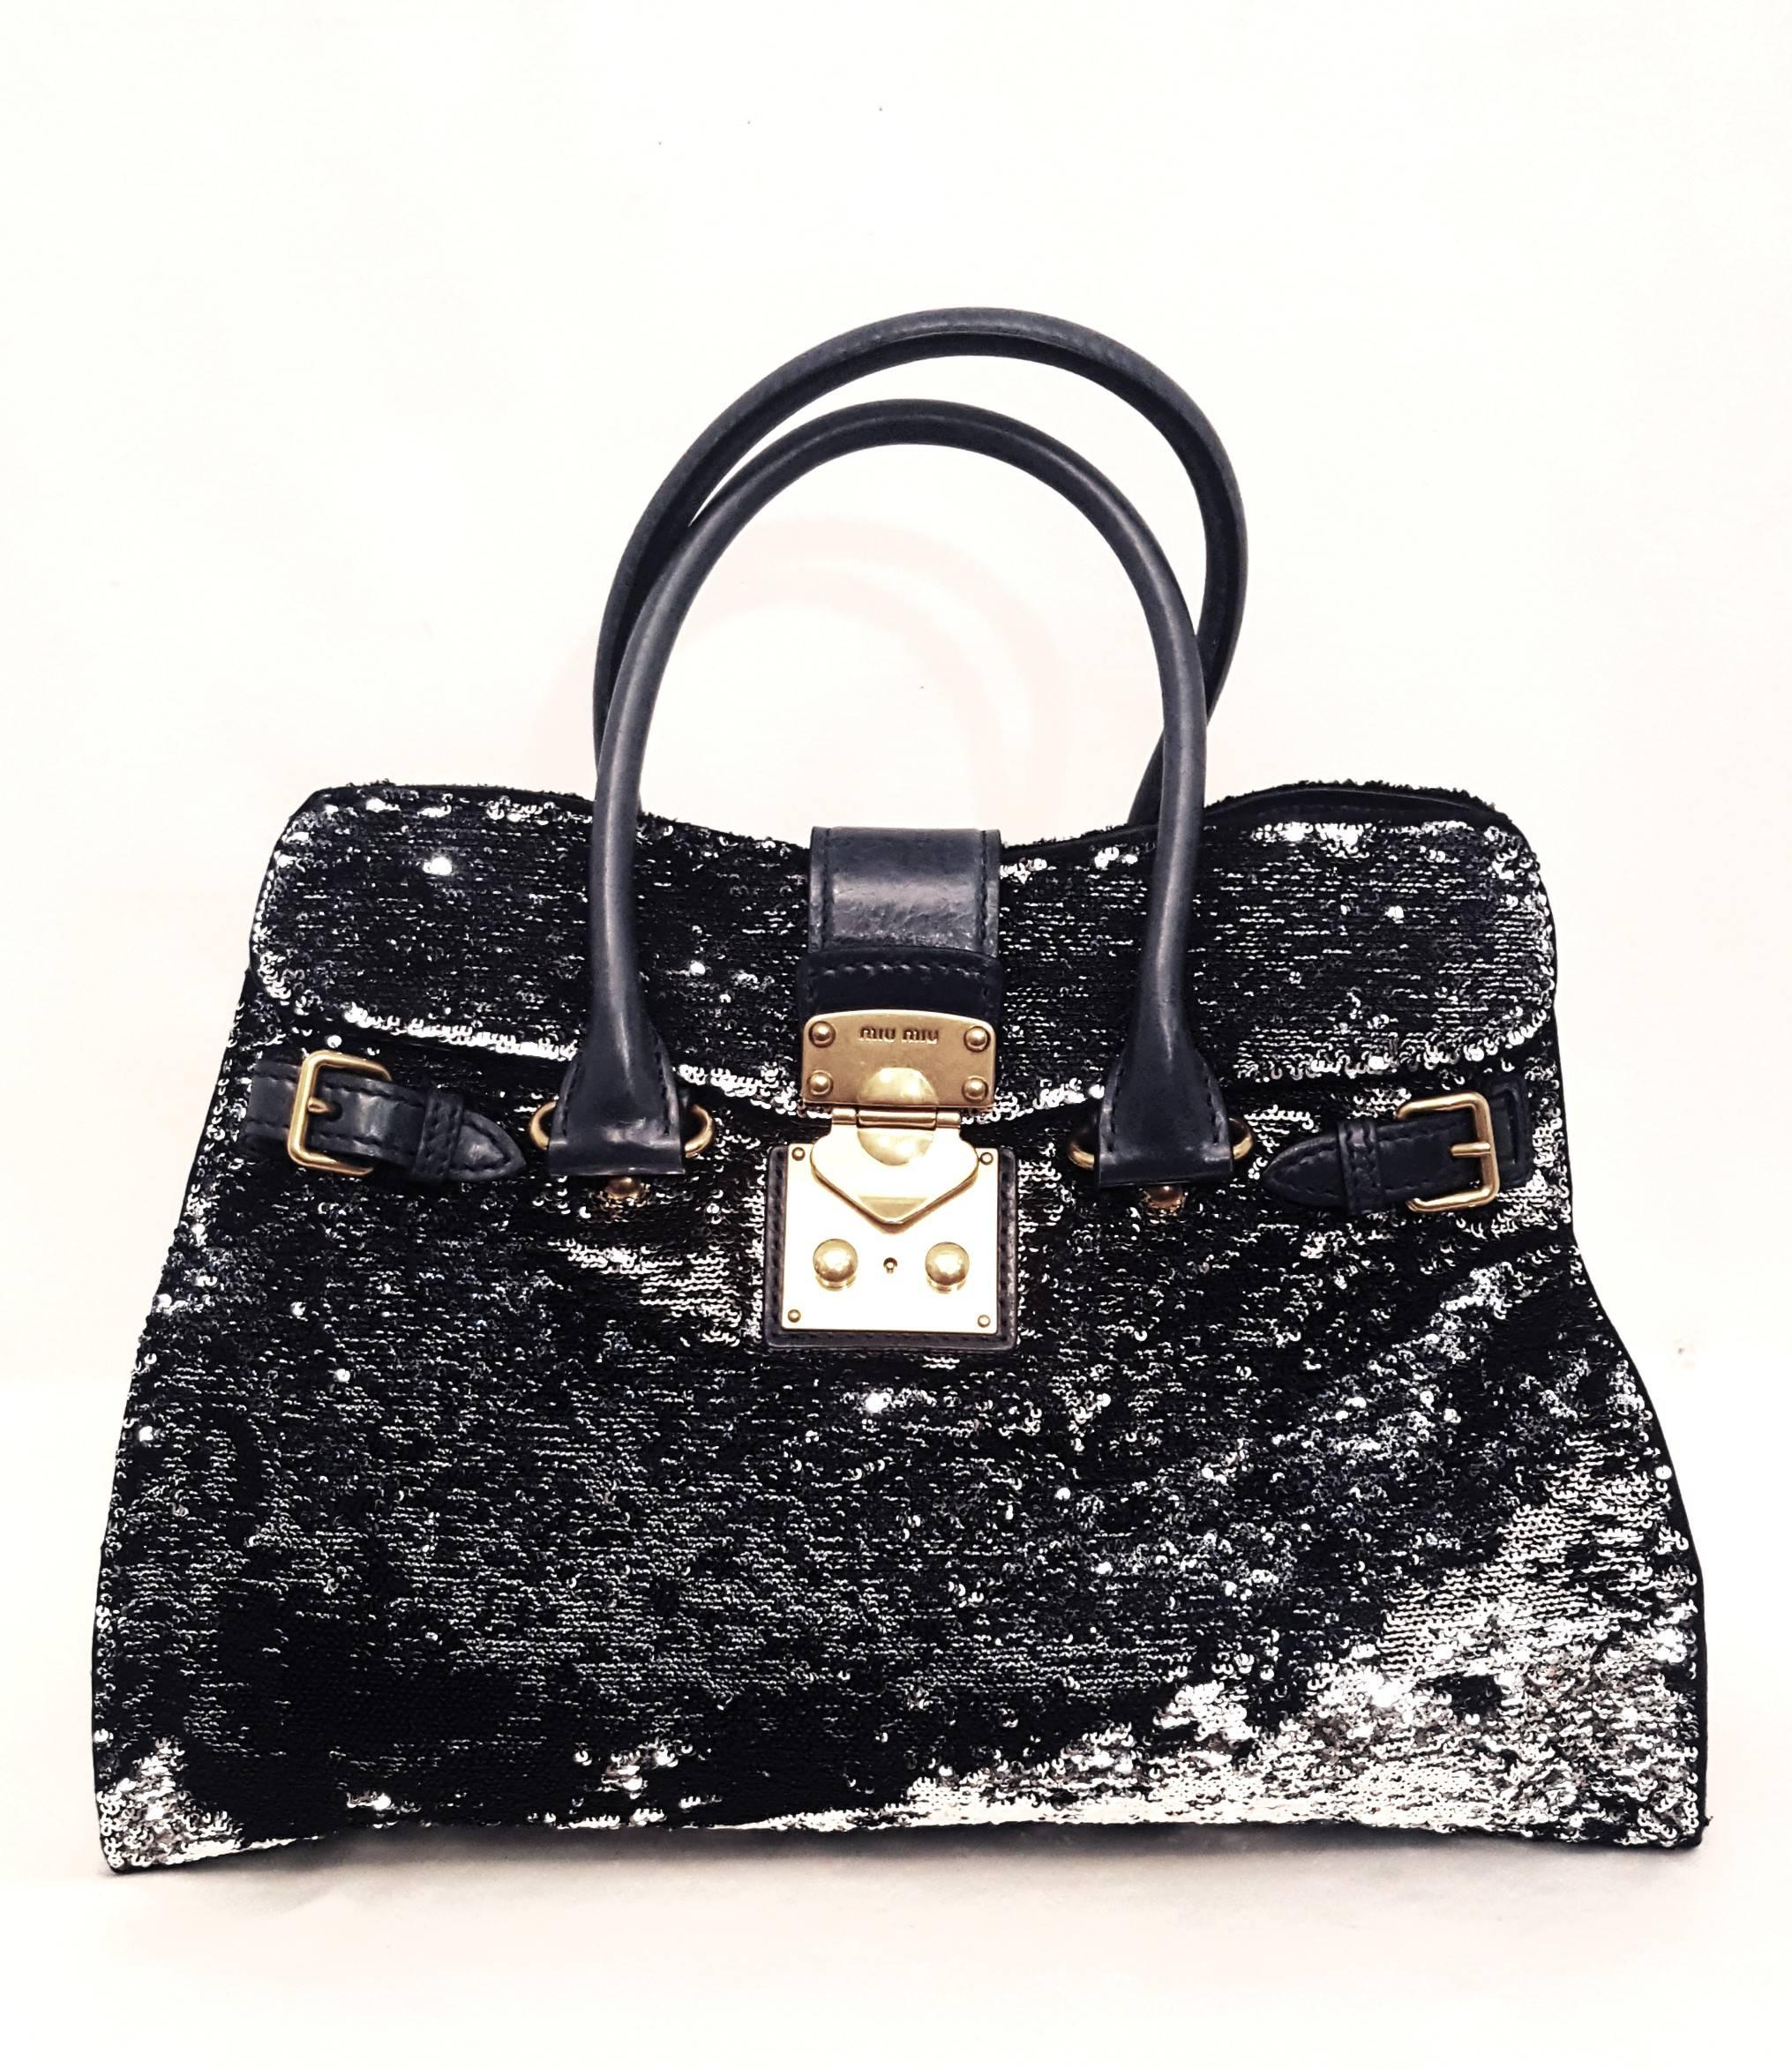 Miu Miu Paillettes black/silver tone double sided sequin argento shopping tote that features two tall rolled  leather top handles with polished gold hardware. This chic tote is finely crafted of black & silver tone double sided sequins that change